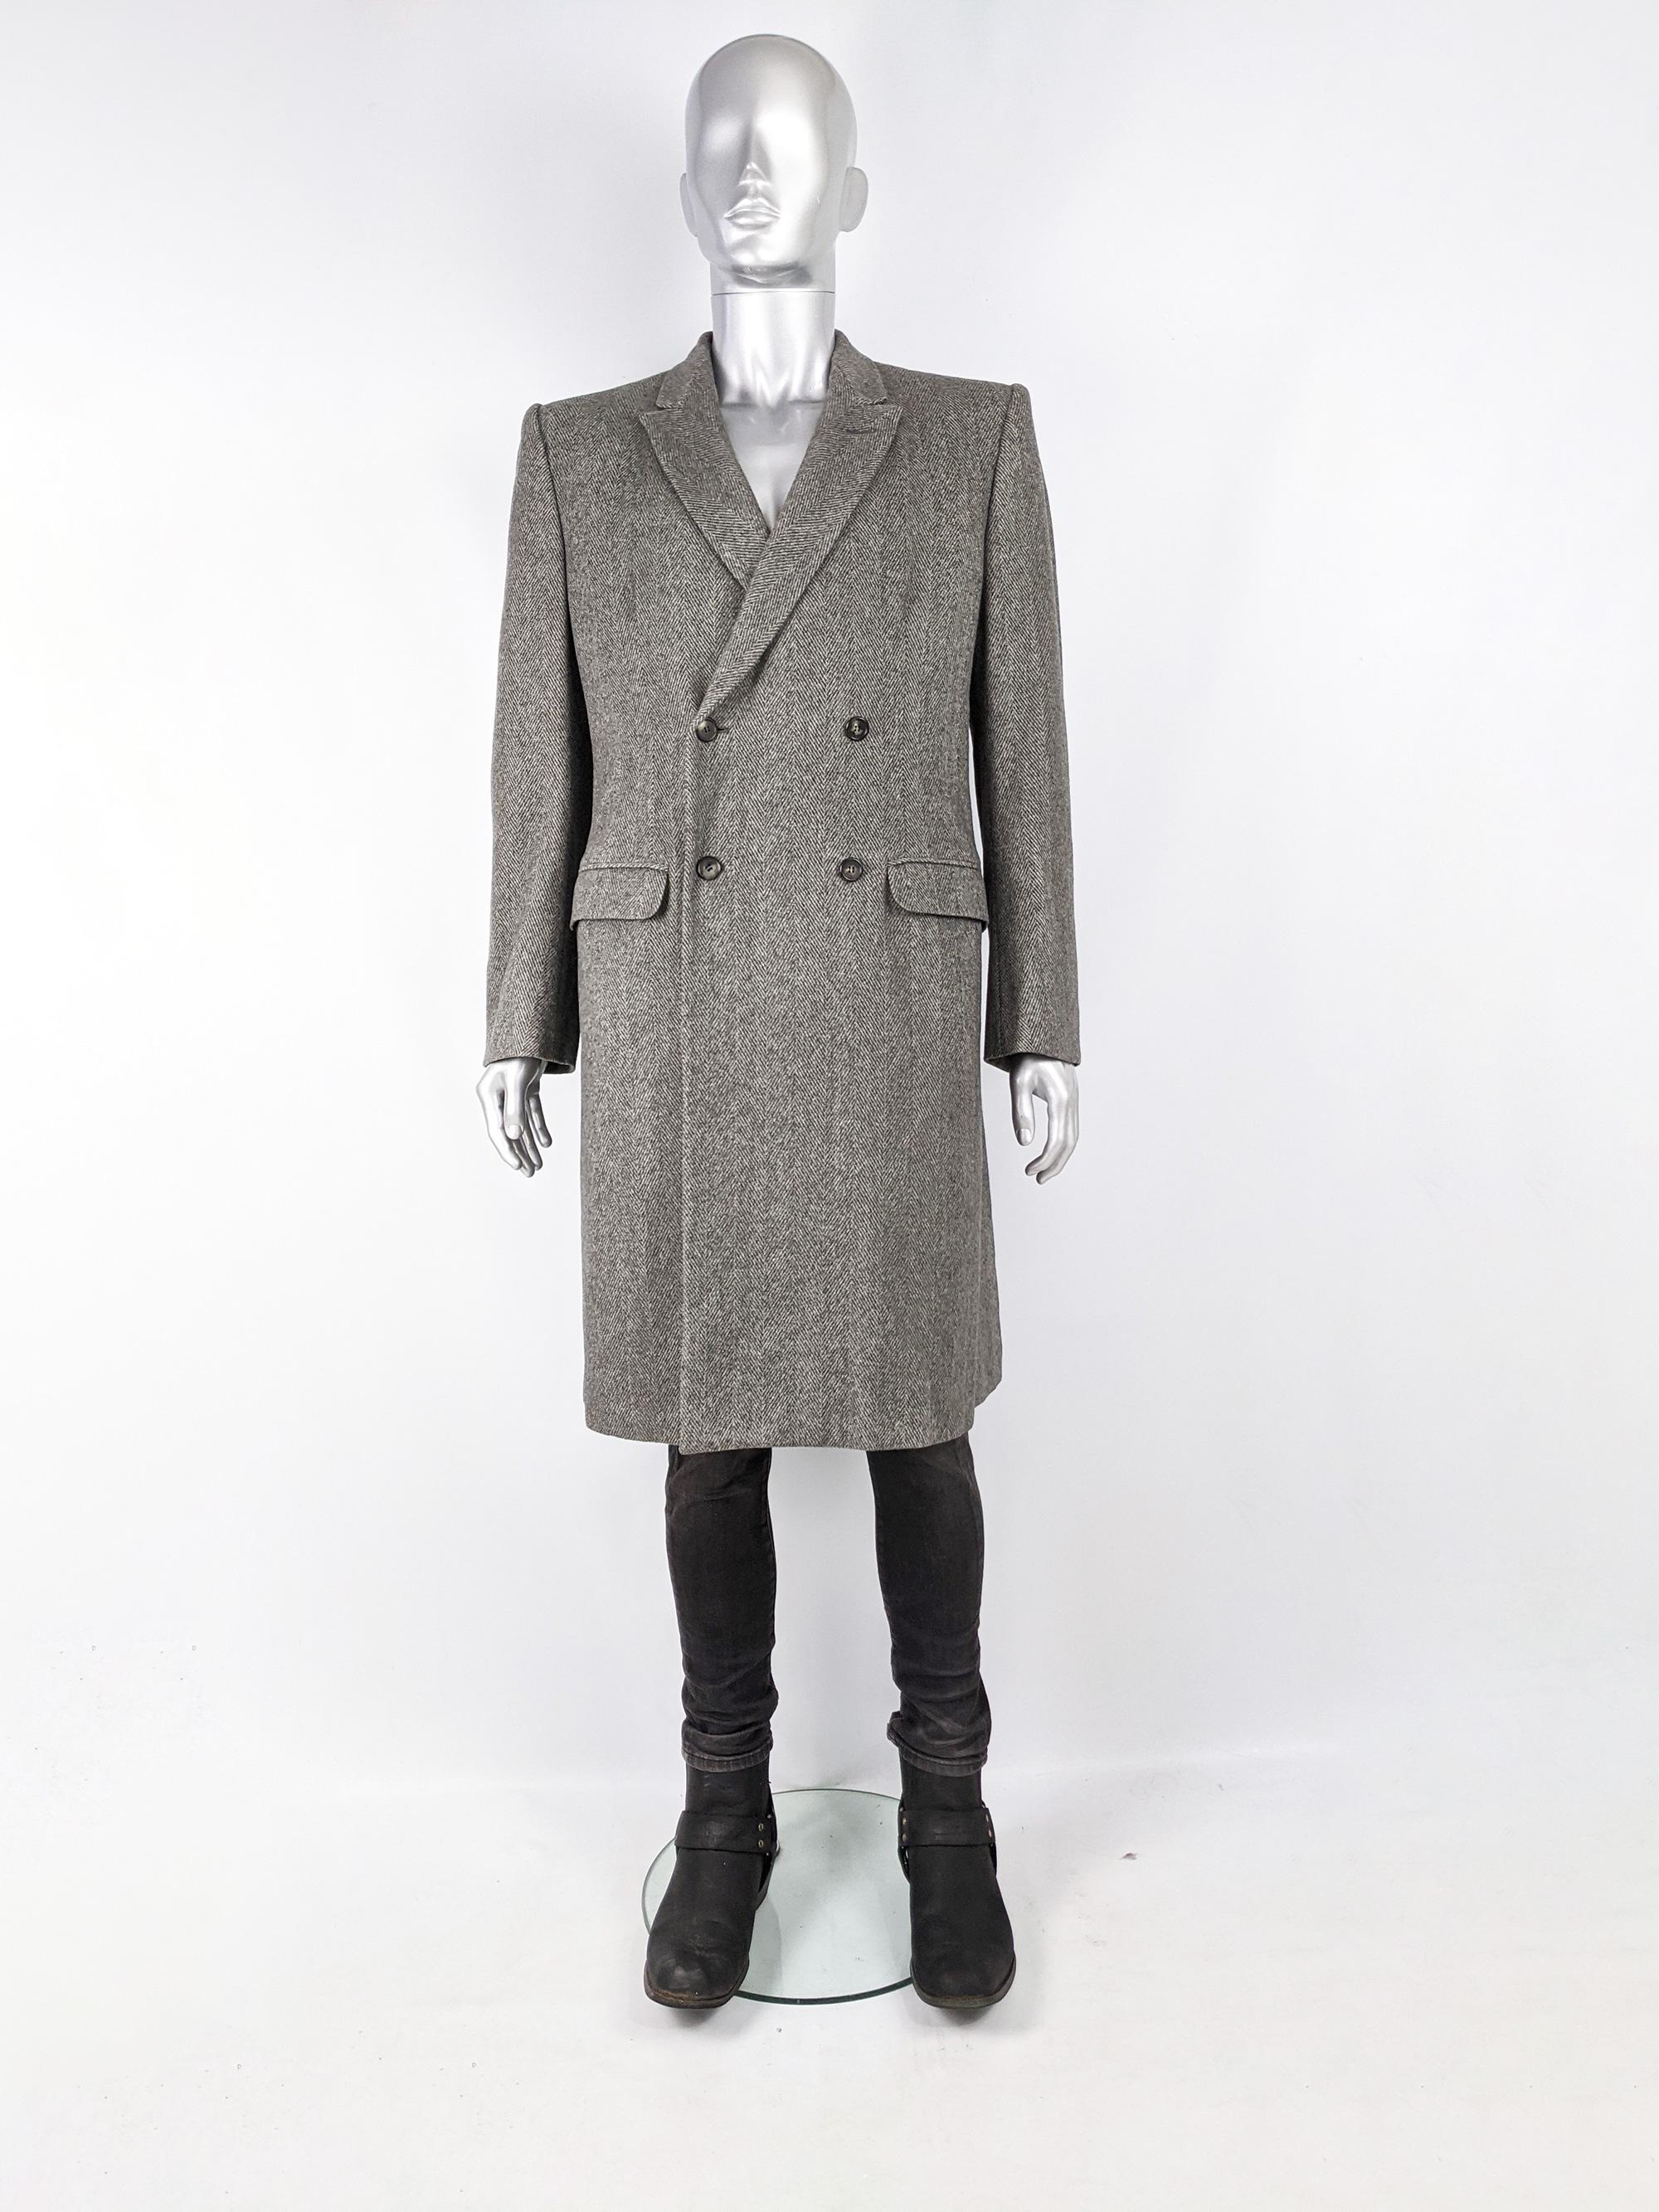 An incredible and rare archival mens Alexander McQueen coat from the Fall Winter 2007 collection as seen on the runway. Made in Italy from a luxuriously soft, pure cashmere with a herringbone tweed pattern. The lapels are a subtly rounded peak and